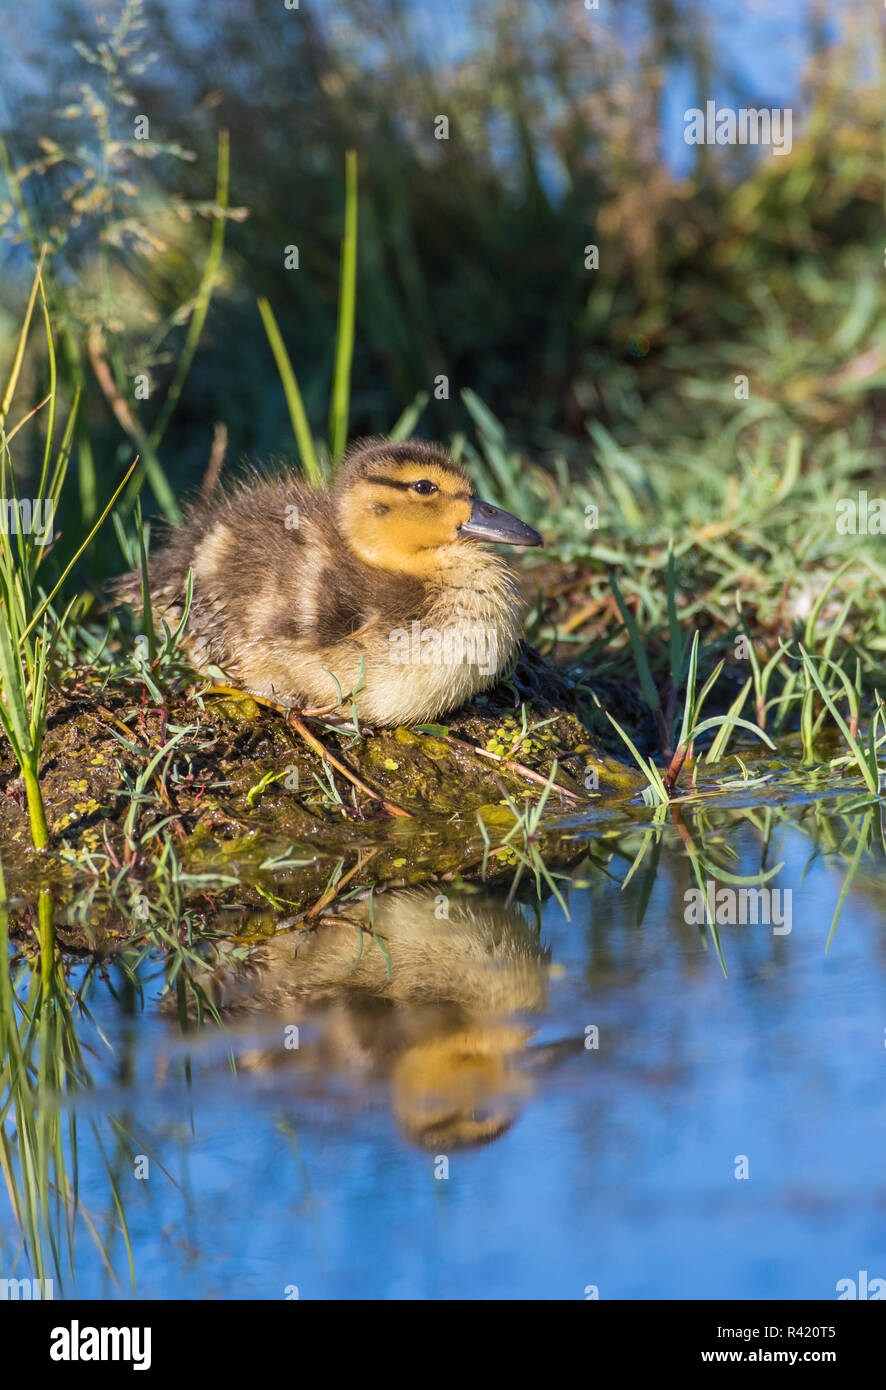 USA, Wyoming, Sublette County. Young duckling resting on a mud flat island while being reflected in a pond. Stock Photo